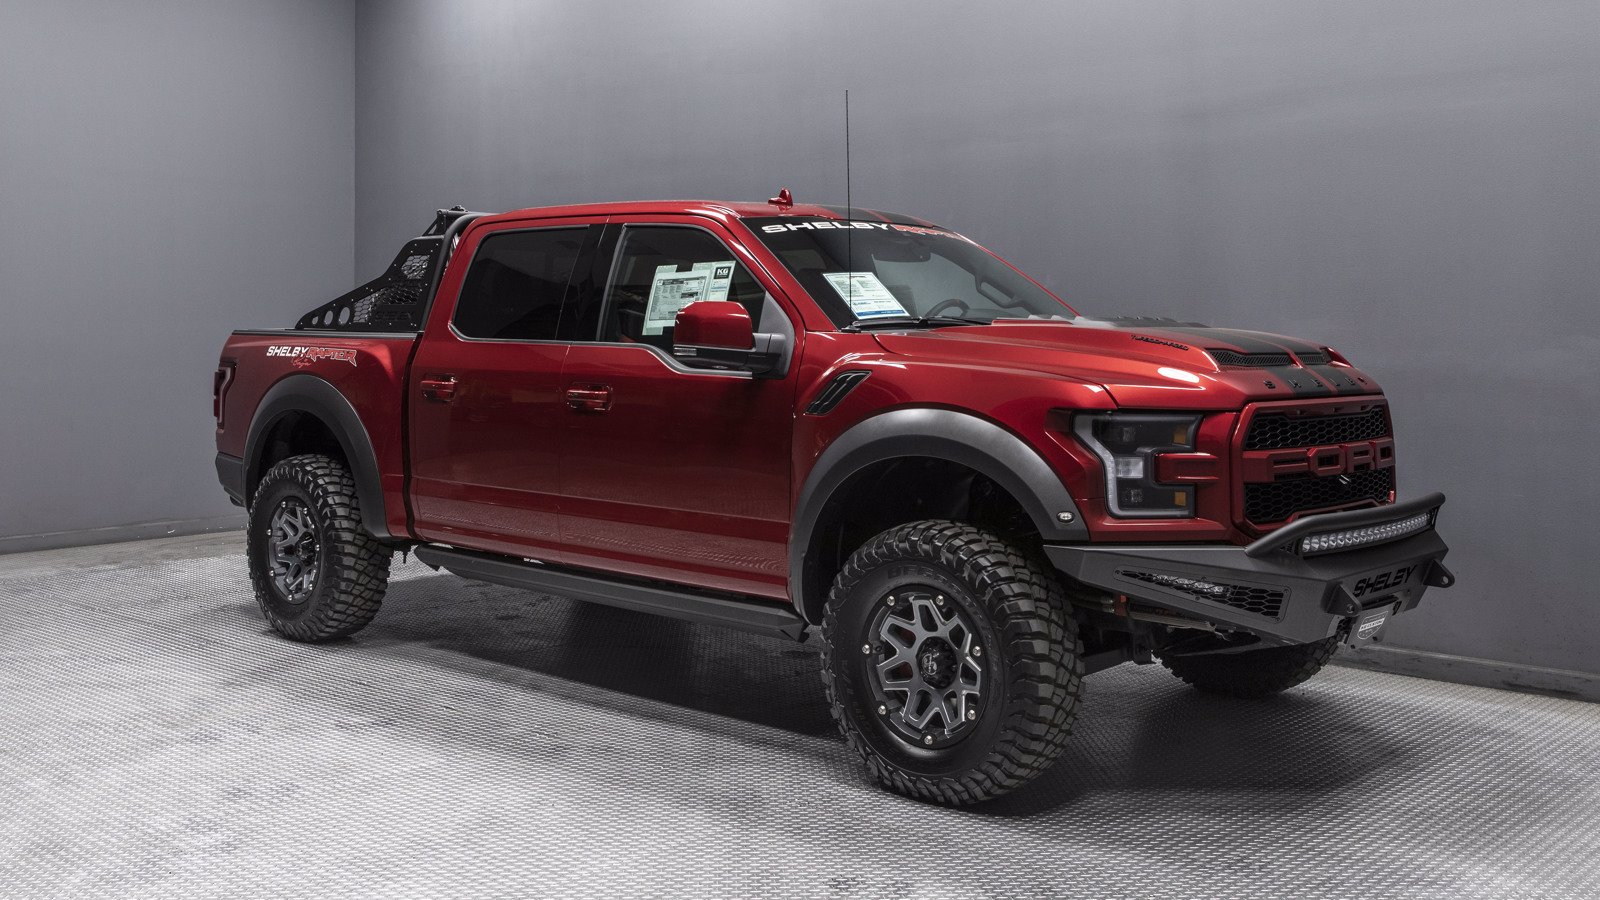 View Ford F 150 Raptor 2020 Price In India Images Wallpaper Zoo